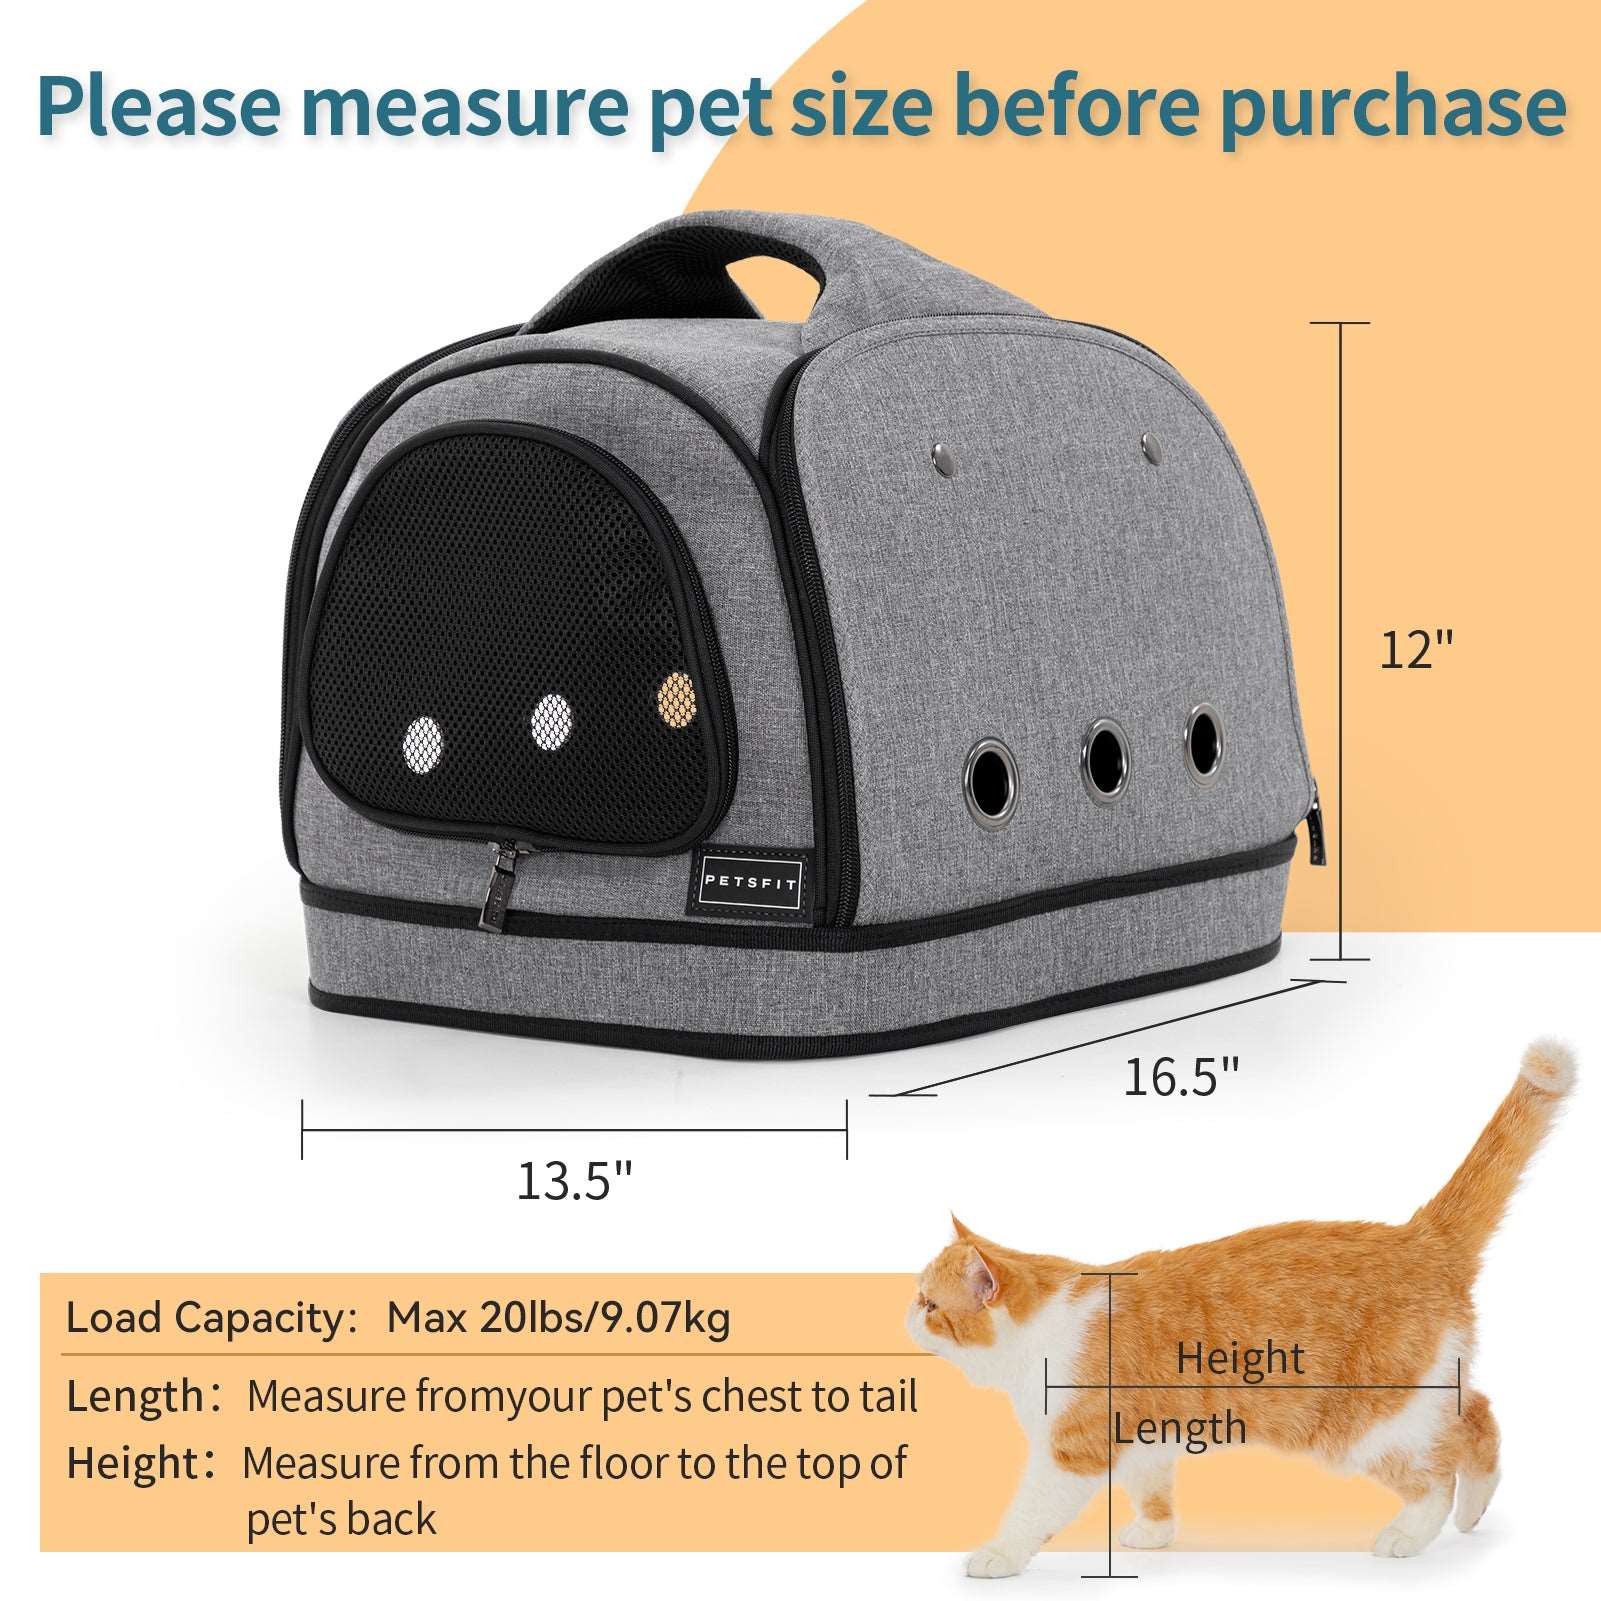 Petsfit-Soft-Sided-Small-Dog-Kennel&Cat-Kennel-02